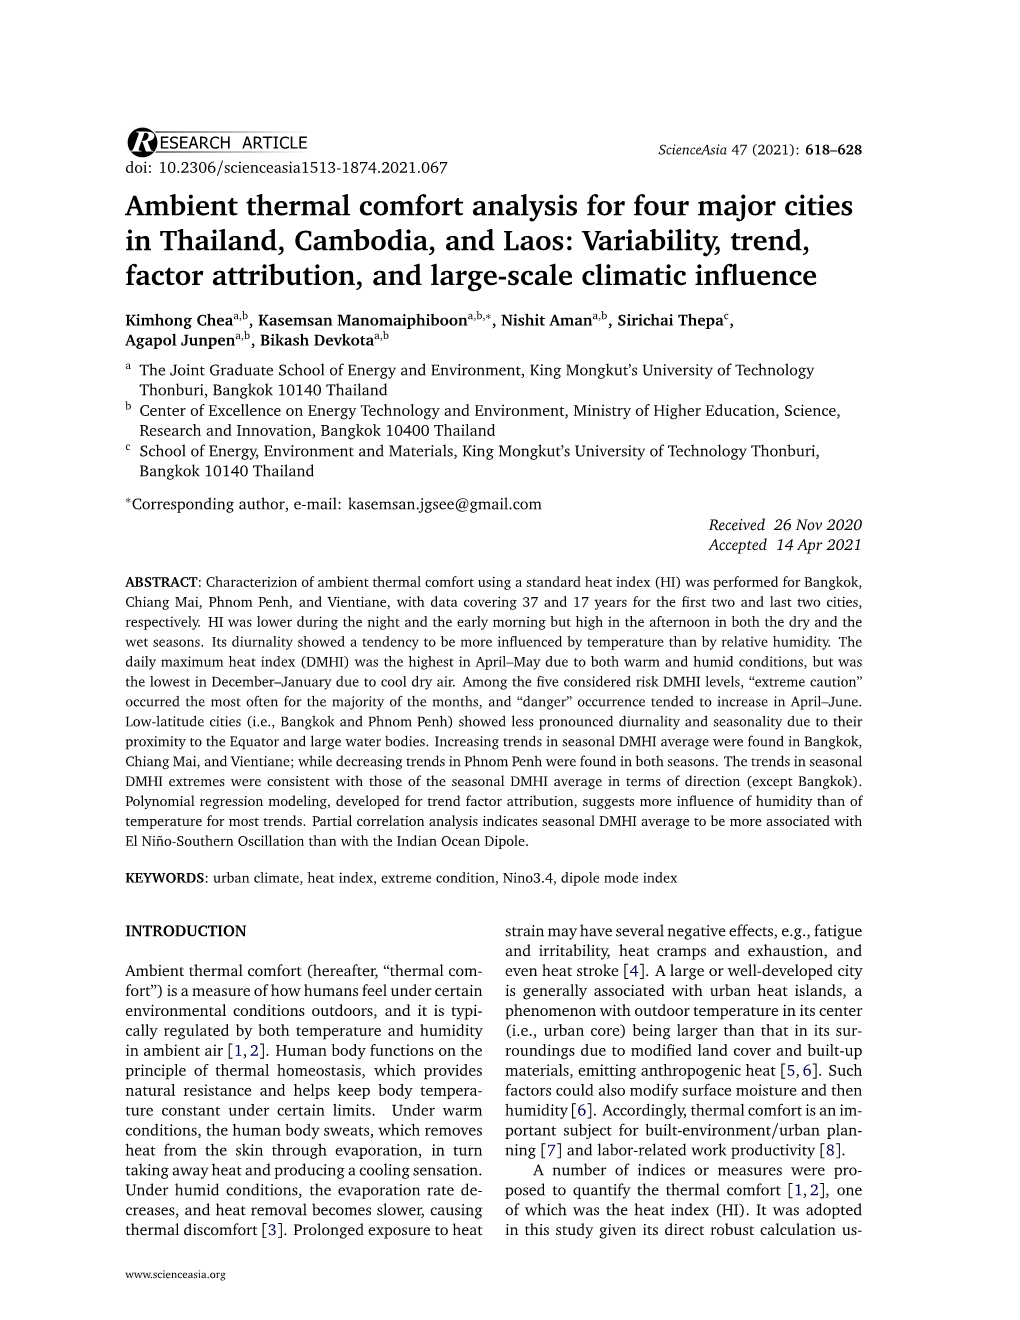 Ambient Thermal Comfort Analysis for Four Major Cities in Thailand, Cambodia, and Laos: Variability, Trend, Factor Attribution, and Large-Scale Climatic Inﬂuence